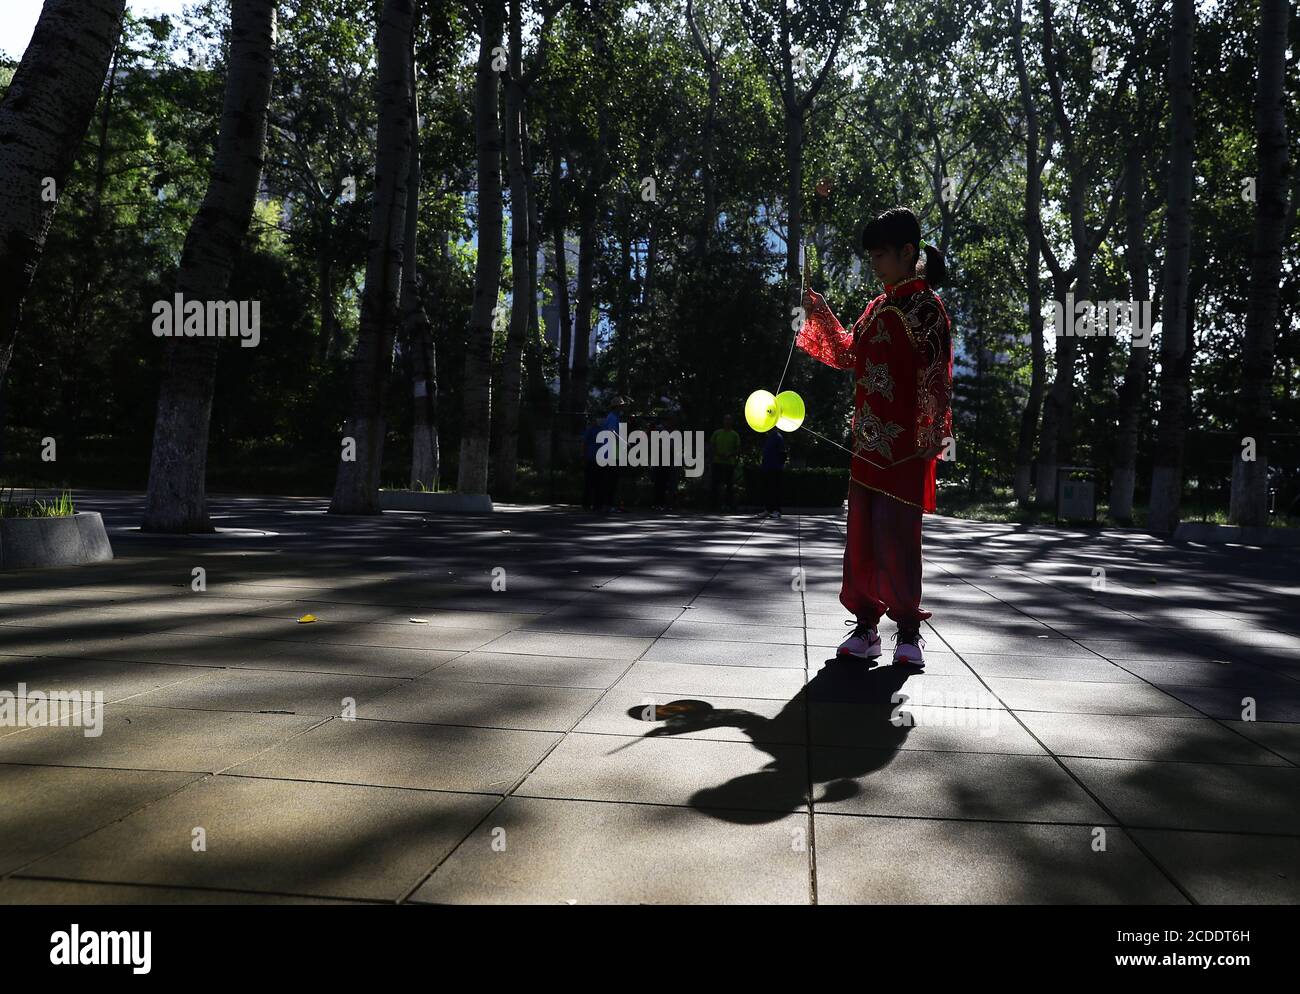 (200828) -- BEIJING, Aug. 28, 2020 (Xinhua) -- Dong Yutong plays diabolo at Wukesong Diabolo Culture Square in Beijing, capital of China, Aug. 11, 2020. Dong Shulin, 66, lives with his wife Mei Yongpei and his 9-year-old granddaughter Dong Yutong in Beijing. Dong Shulin started to play diabolo in 2003 and now the whole family are fond of playing this traditional folk game, in which one can throw and catch a spinning top by moving a cord fastened to two sticks. In Dong Shulin's home, over 70 diabolos were placed all around. Some of the diabolos were purchased and others were home-made, especial Stock Photo